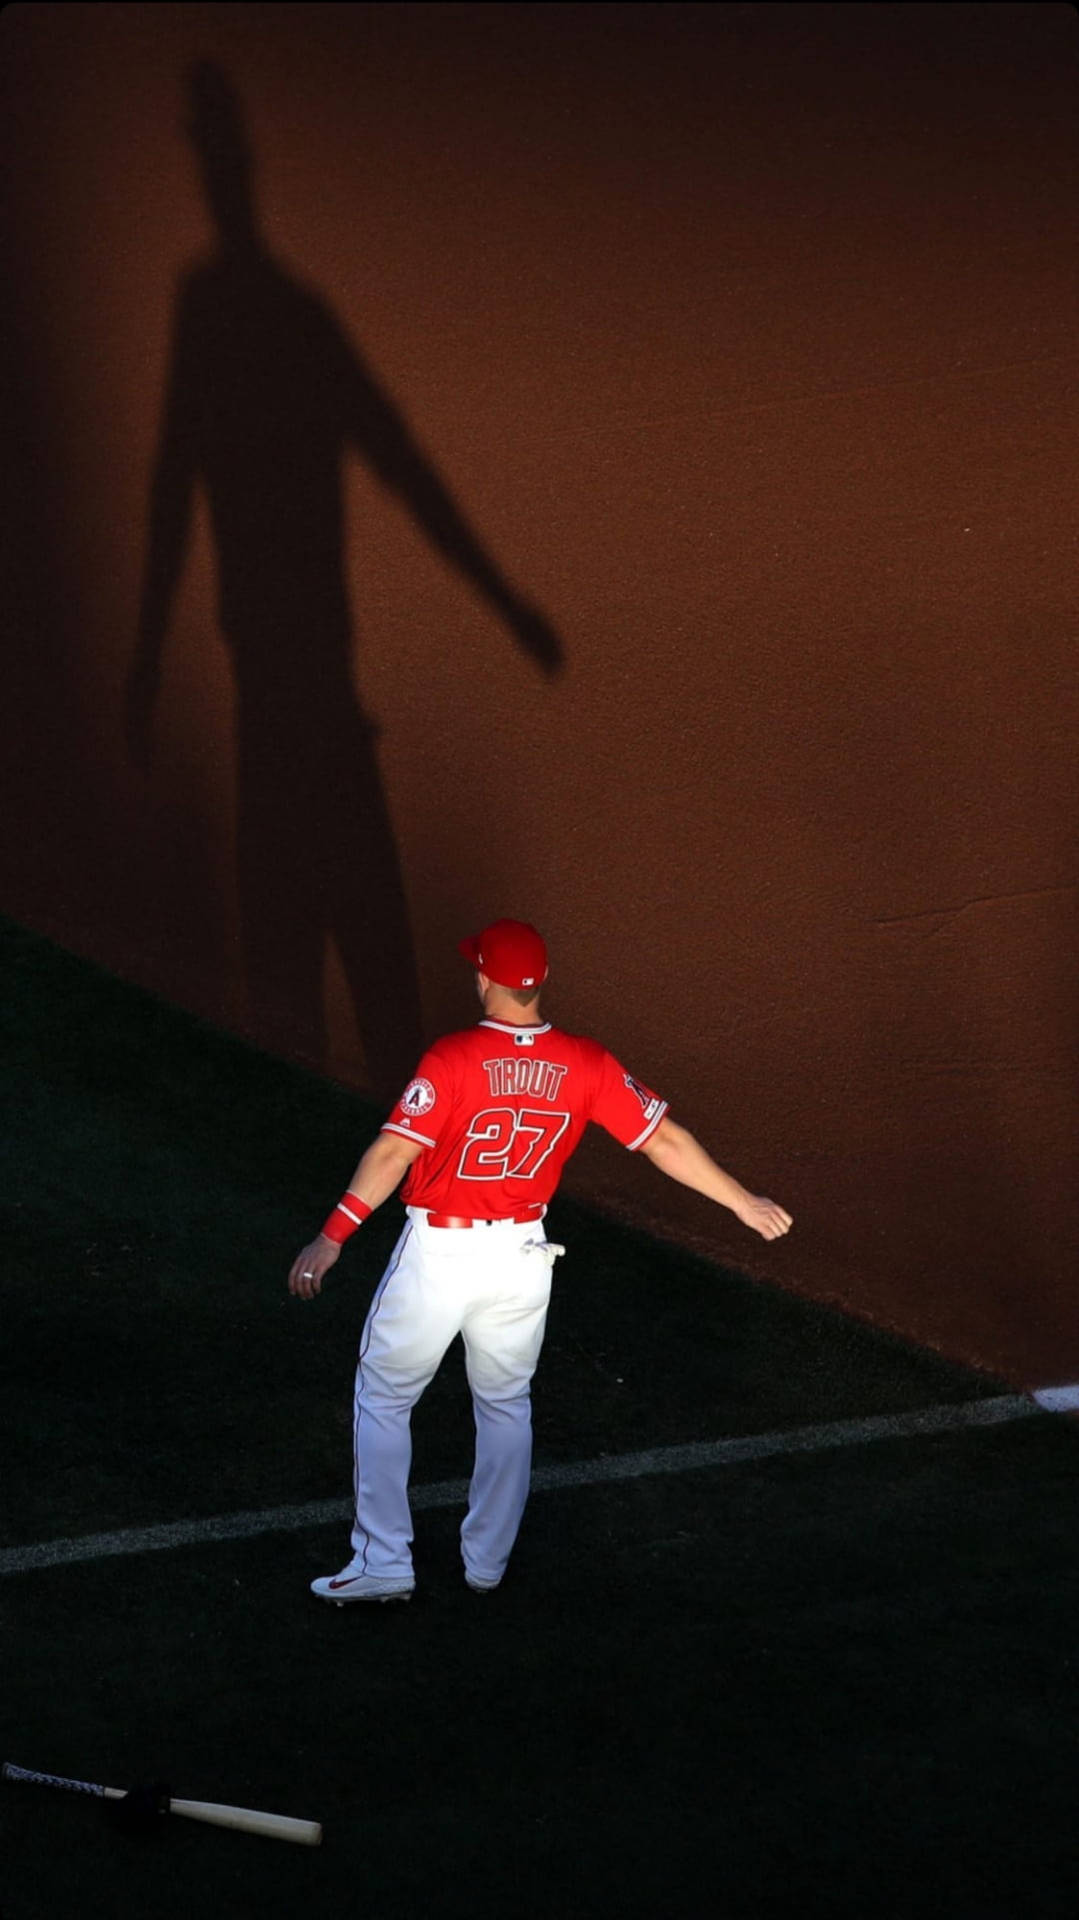 Mike Trout In The Field Wallpaper